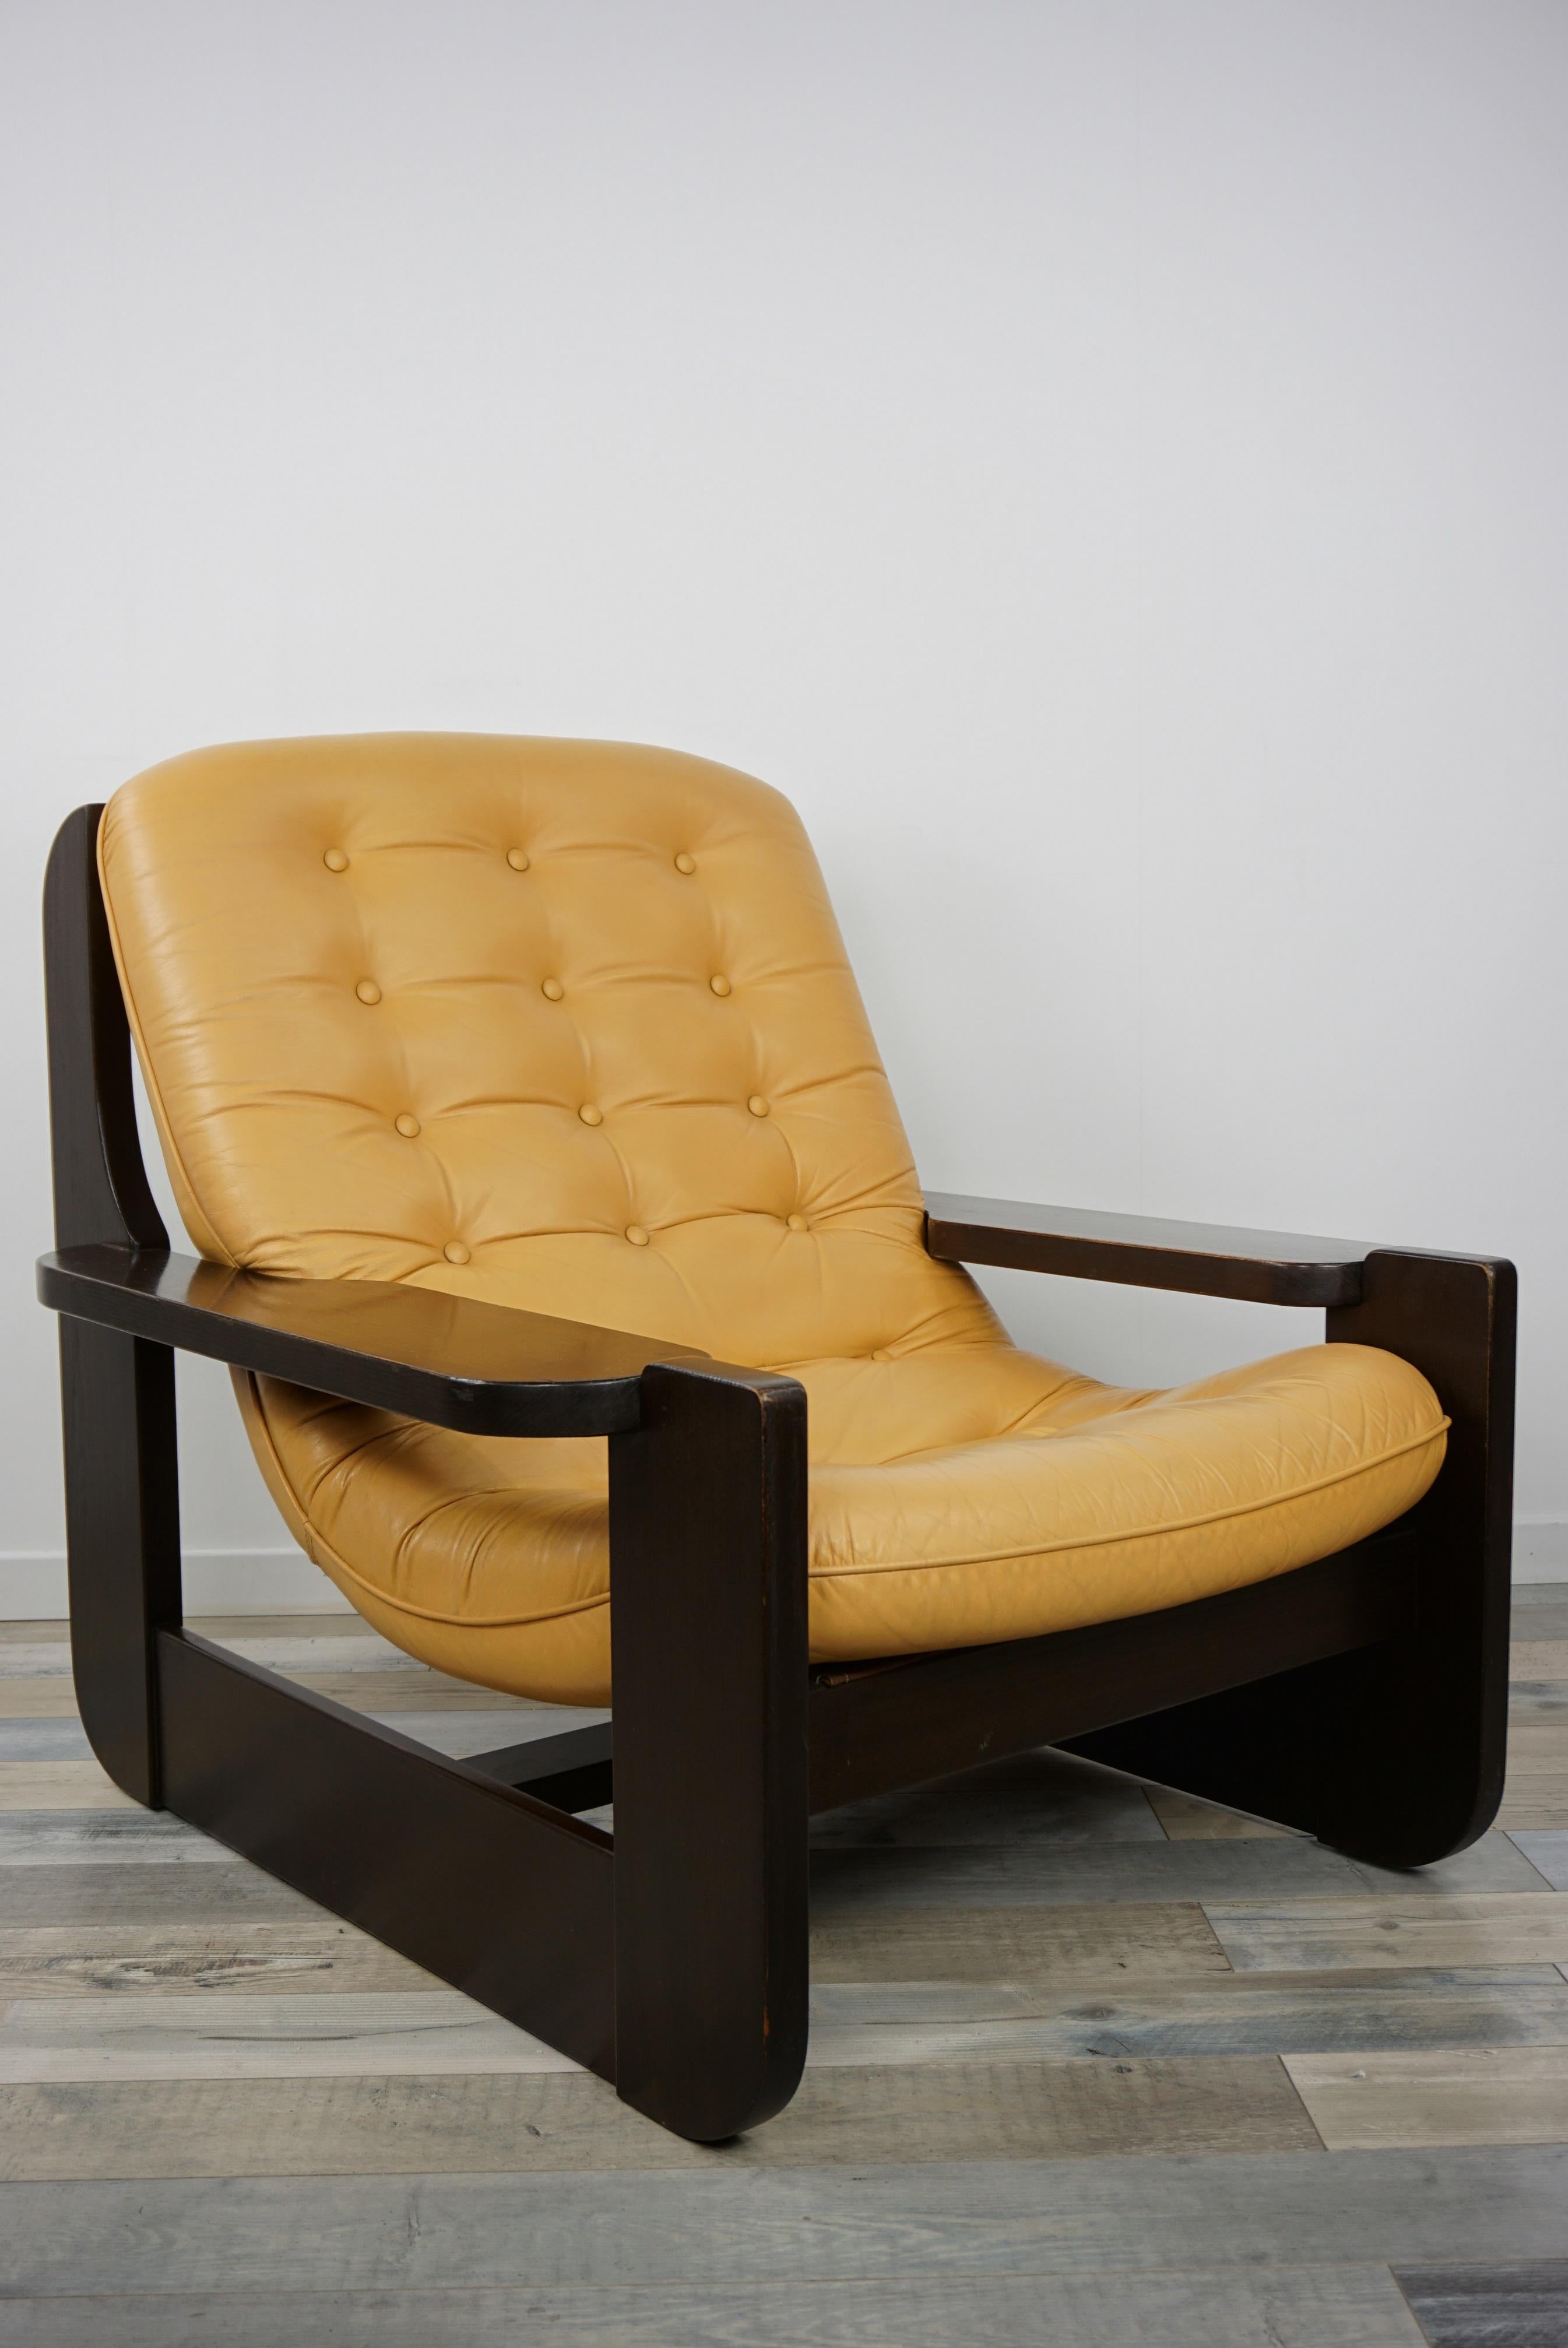 1960s design oak wooden and natural leather lounge armchair composed of a dark brown varnished oak wooden graphic structure with a hanging seat in natural leather. Comfortable and design, amazing and tasty colors like a cookie, all in excellent